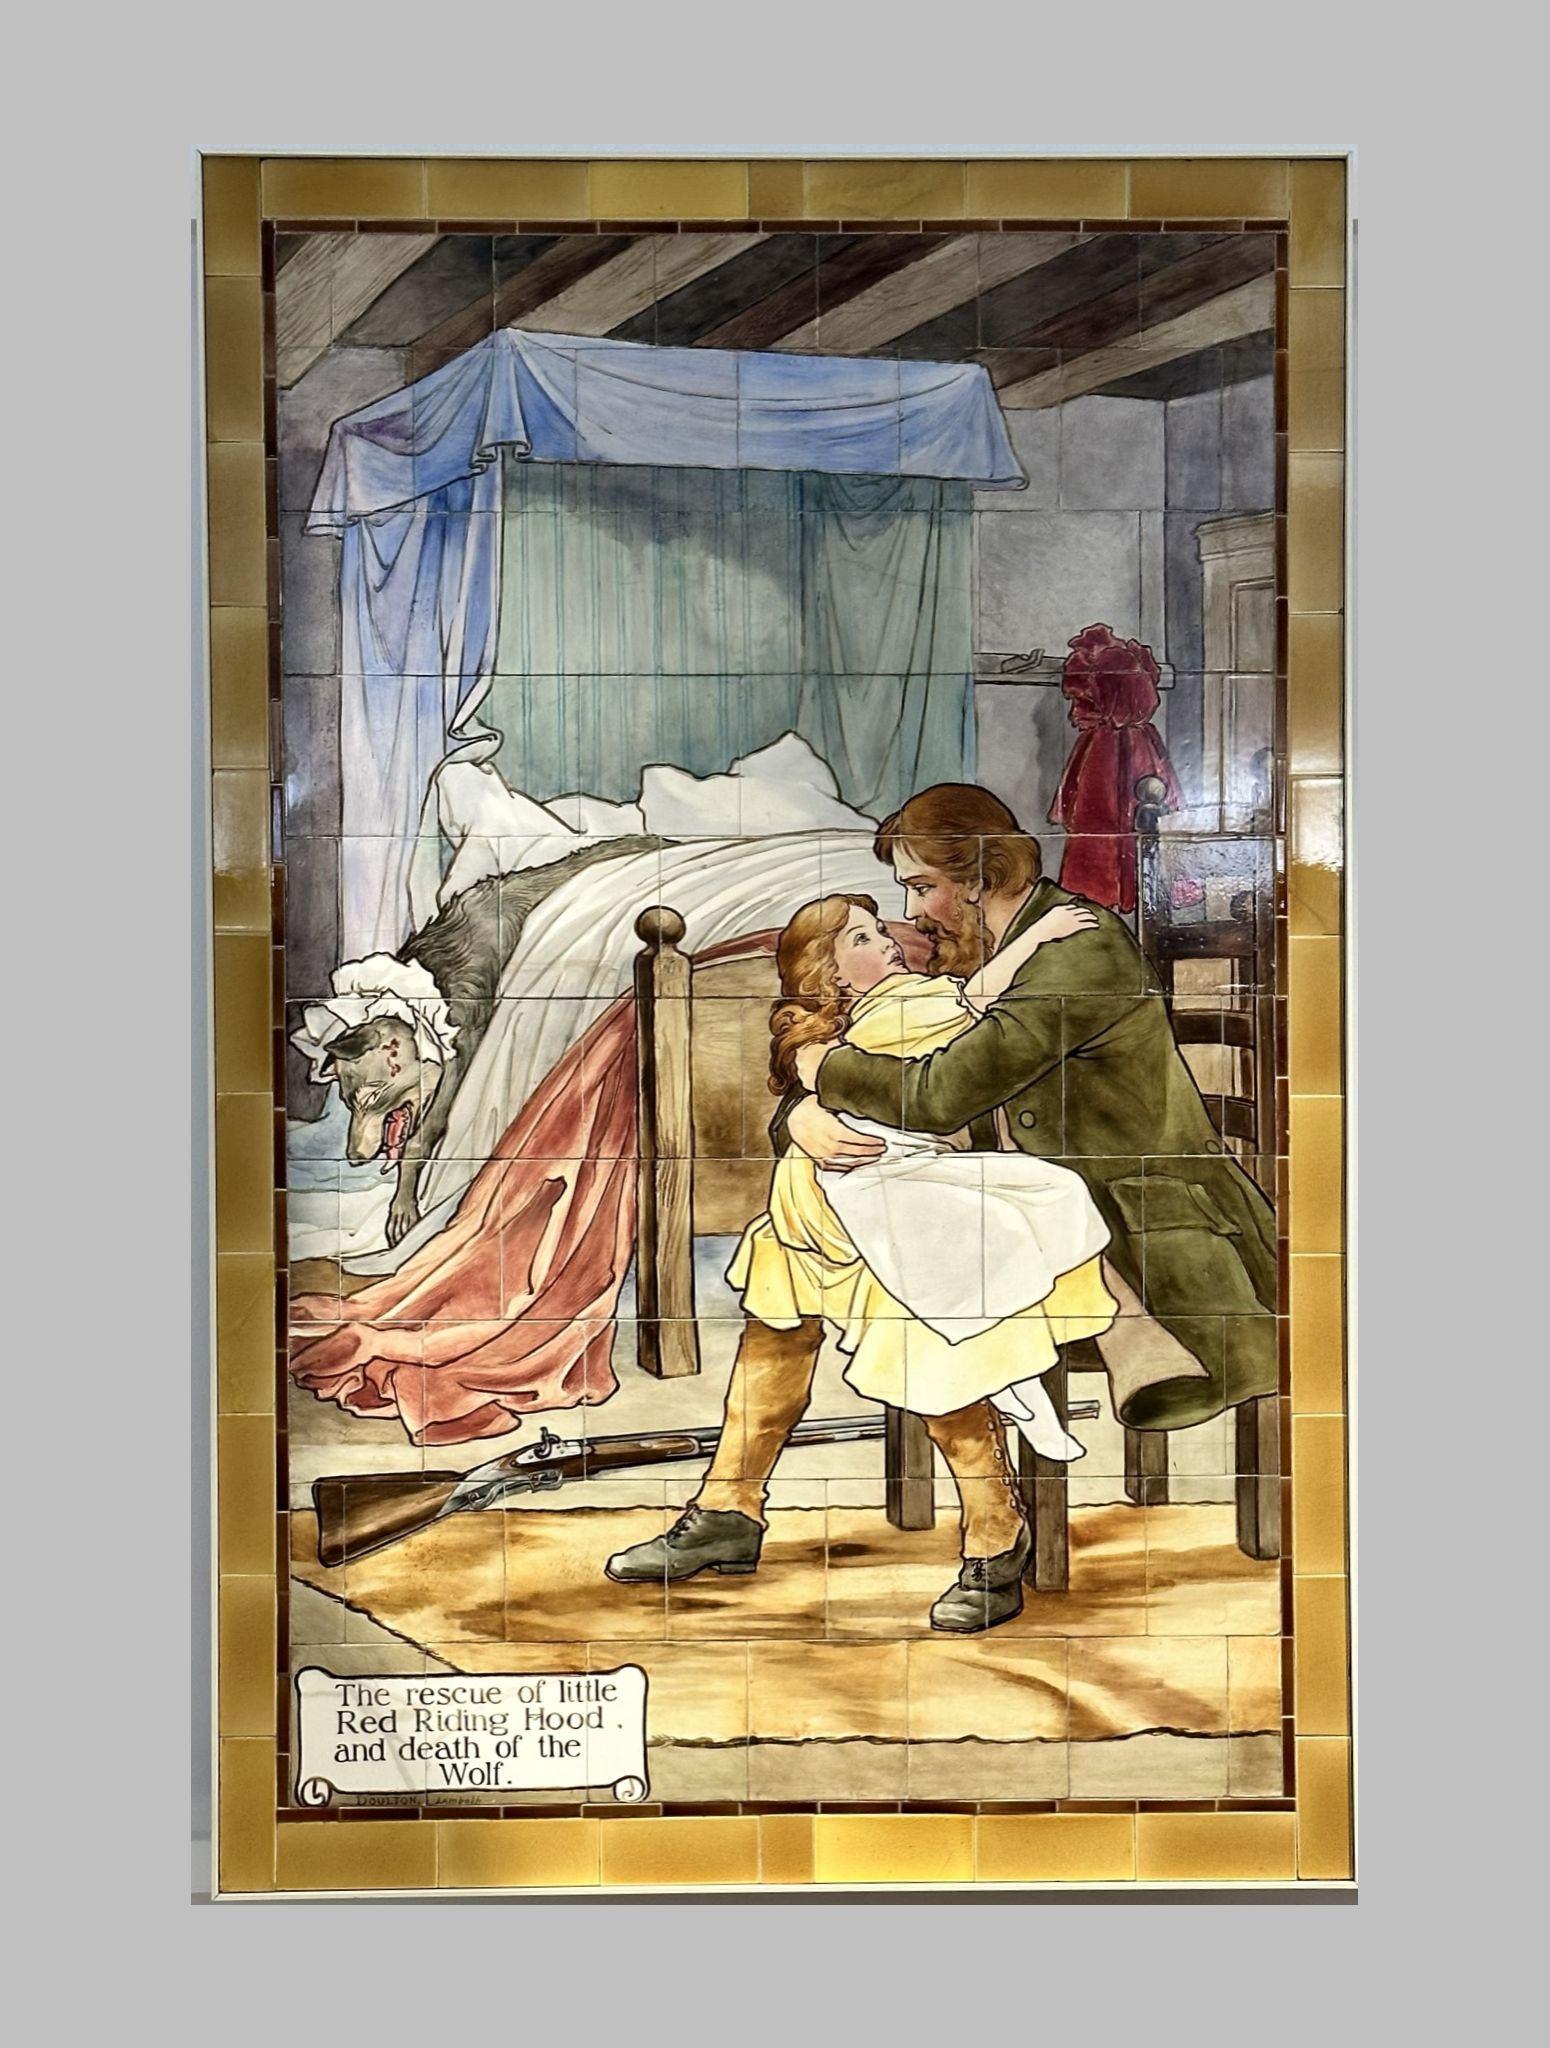 Little Red Riding Hood scene painted on Doulton tiles (commissioned around 1900) from the Evelina Children's Hospital displayed in the long corridor at St Thomas' hospital.